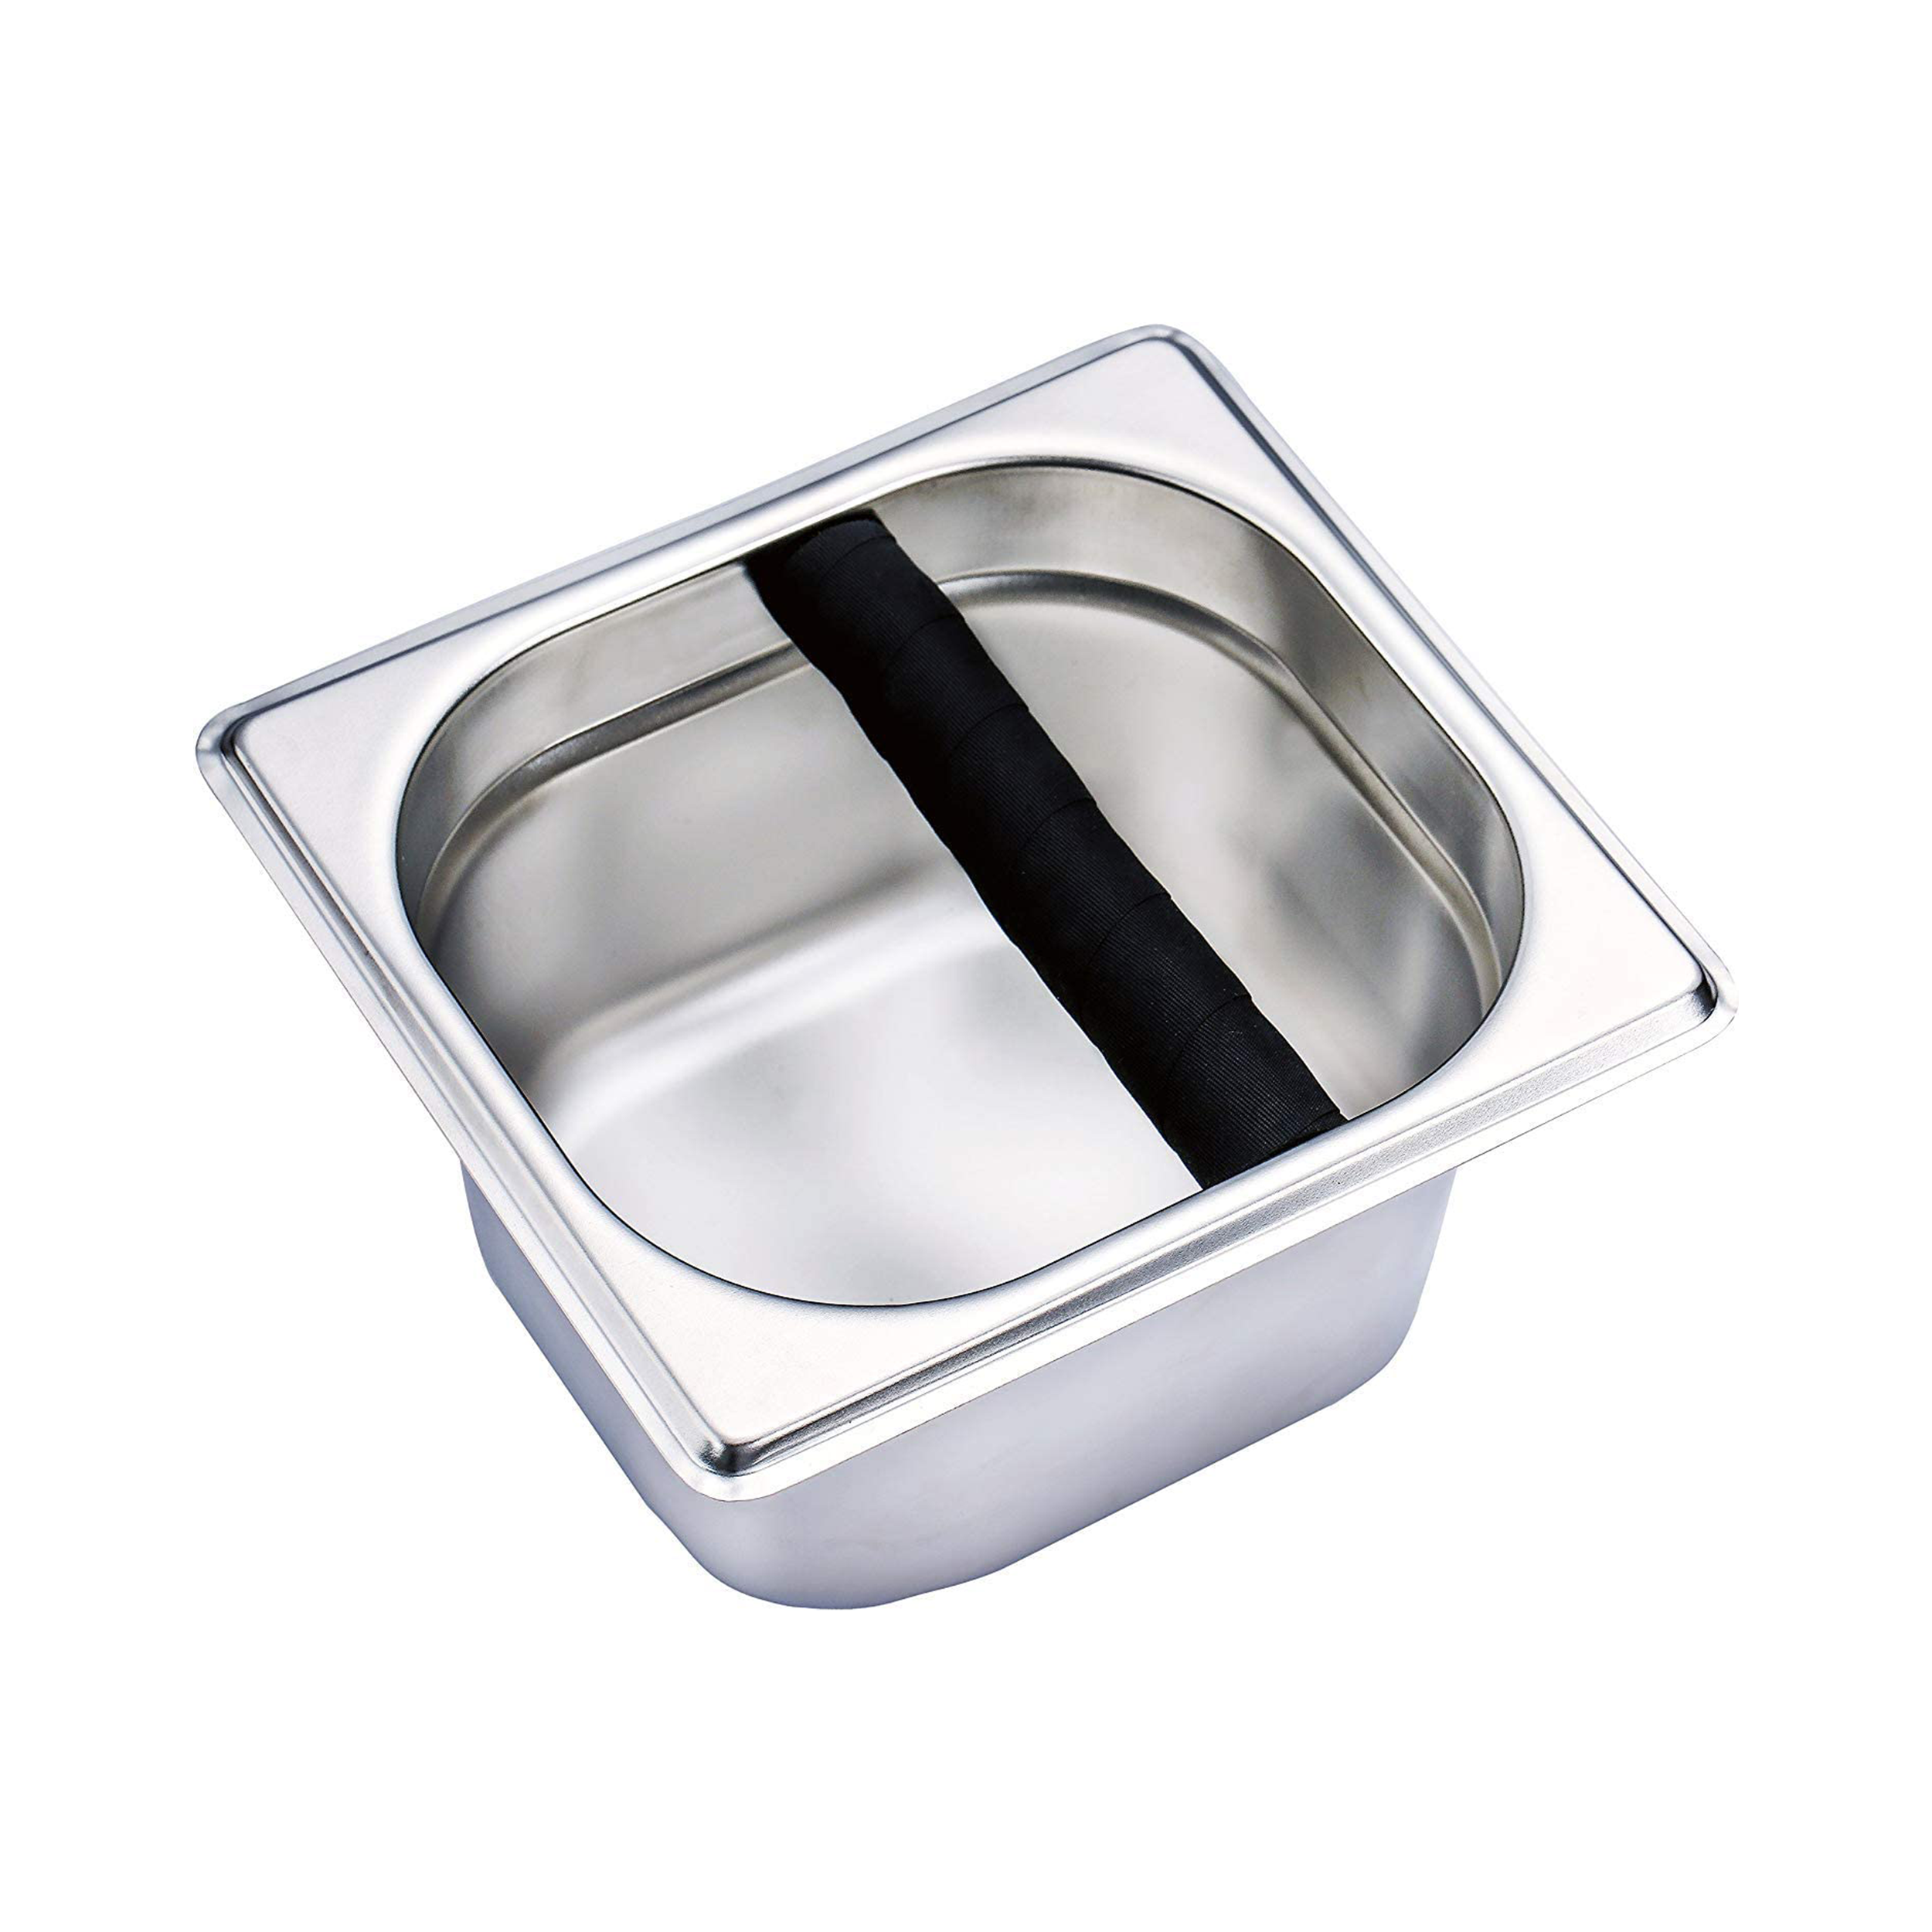 Knock Box - Stainless Steel